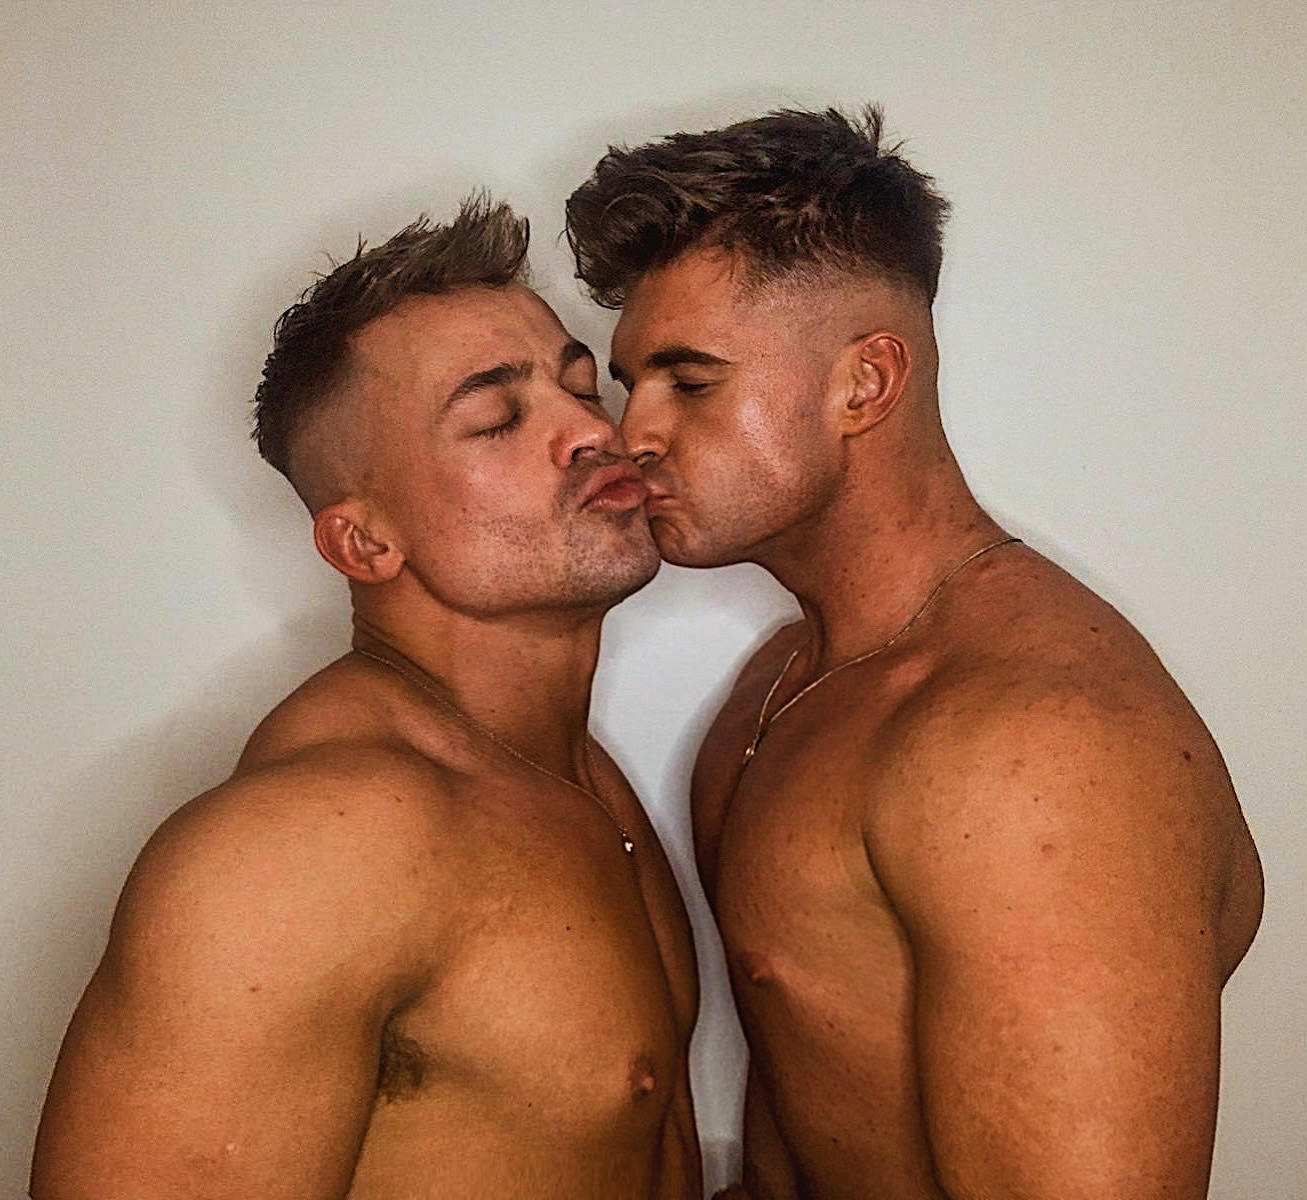 Onlyfans Couple